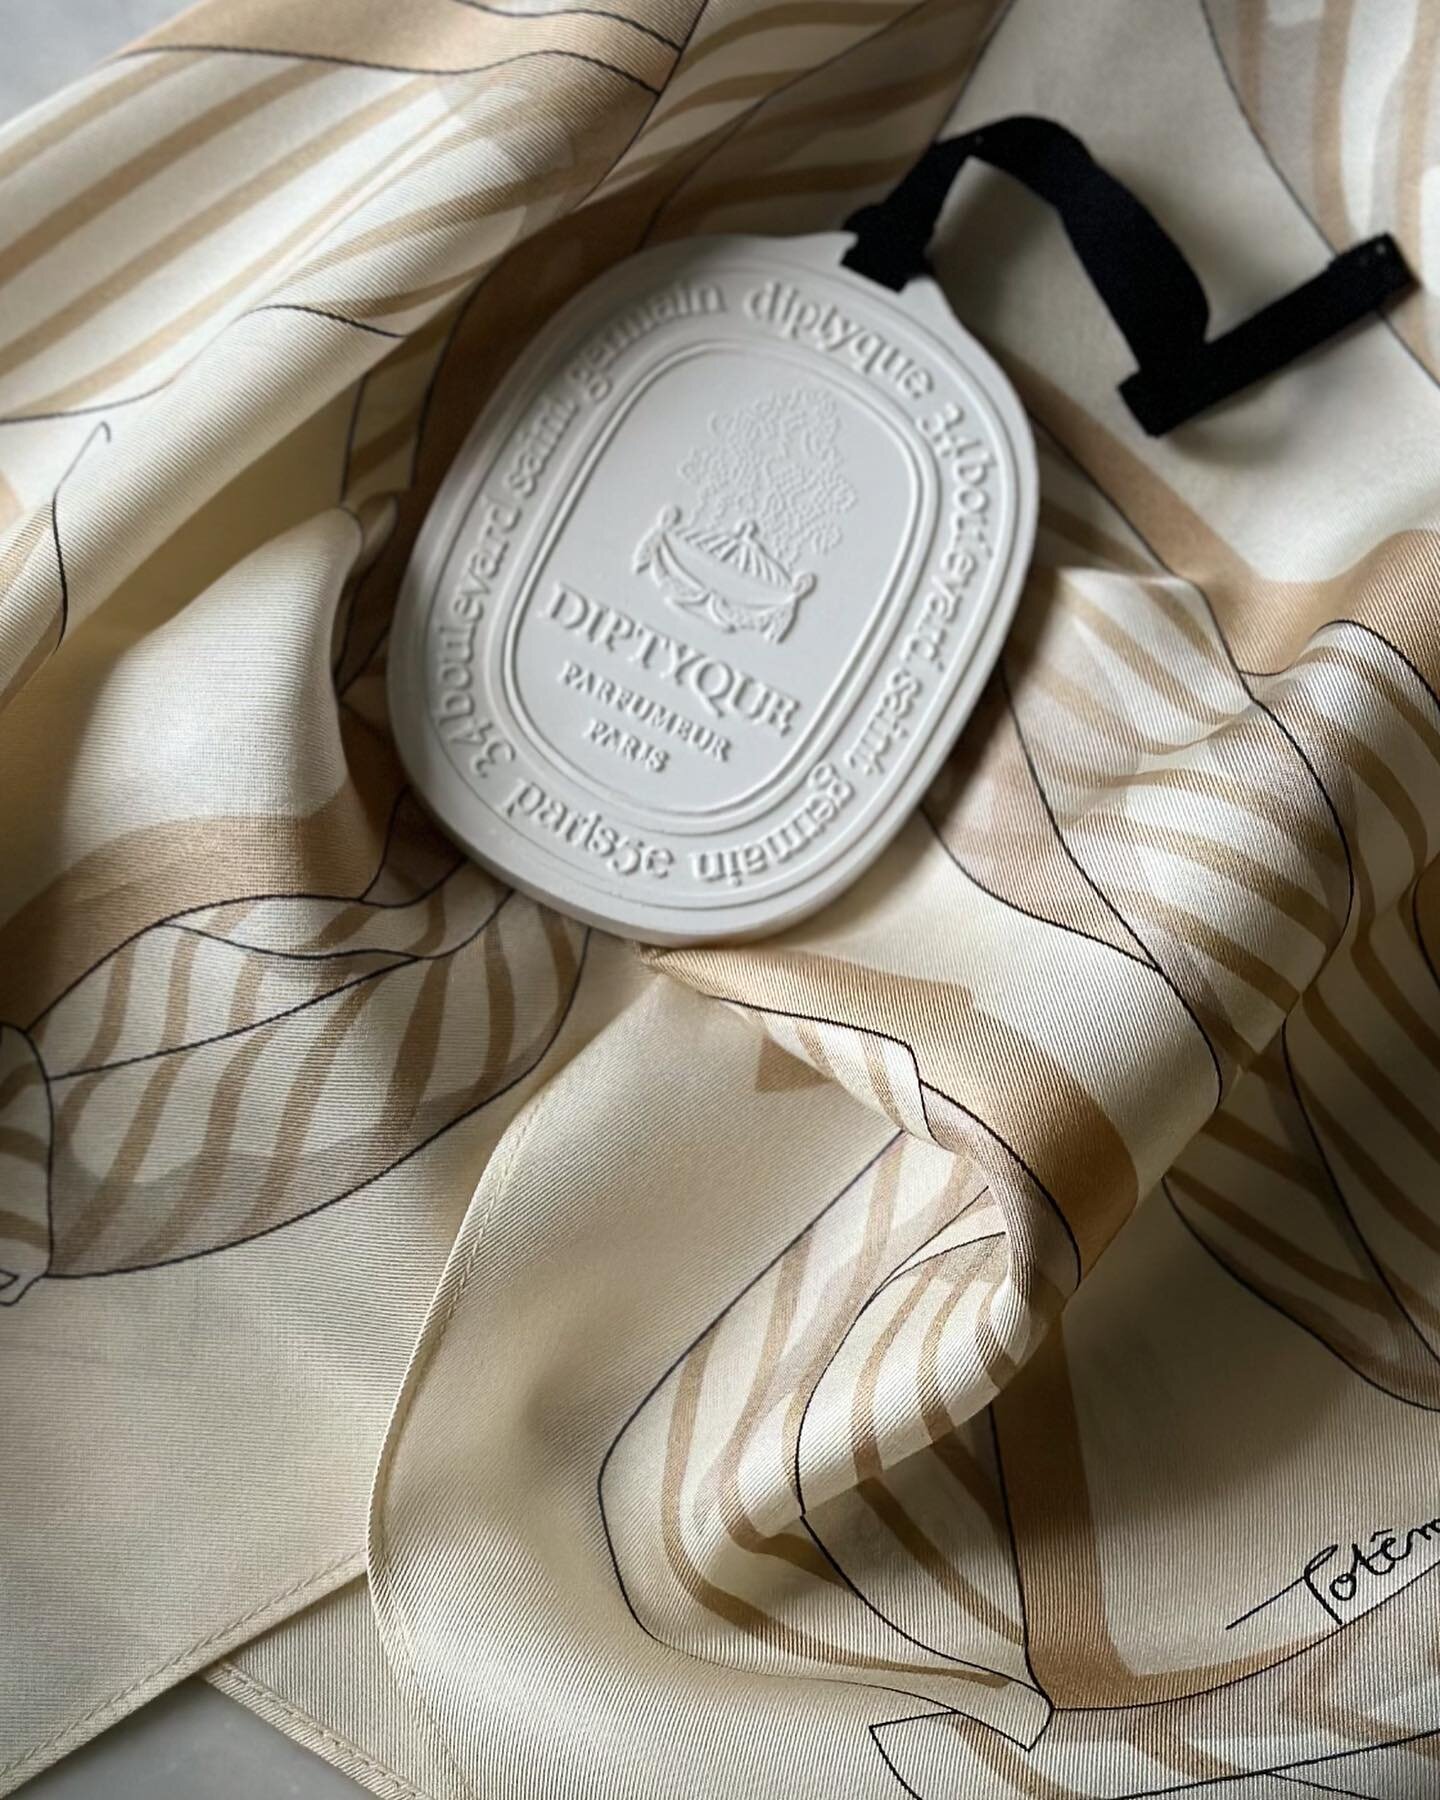 Keeping my best loved pieces fresh all year round, even when it's summer and your summer wardrobe is on hold ☁️ ☁️ 

LA DROGUERIE
Cedarwood perfumed ceramic
@diptyque 
Previously Gifted by @sciencemagic.inc